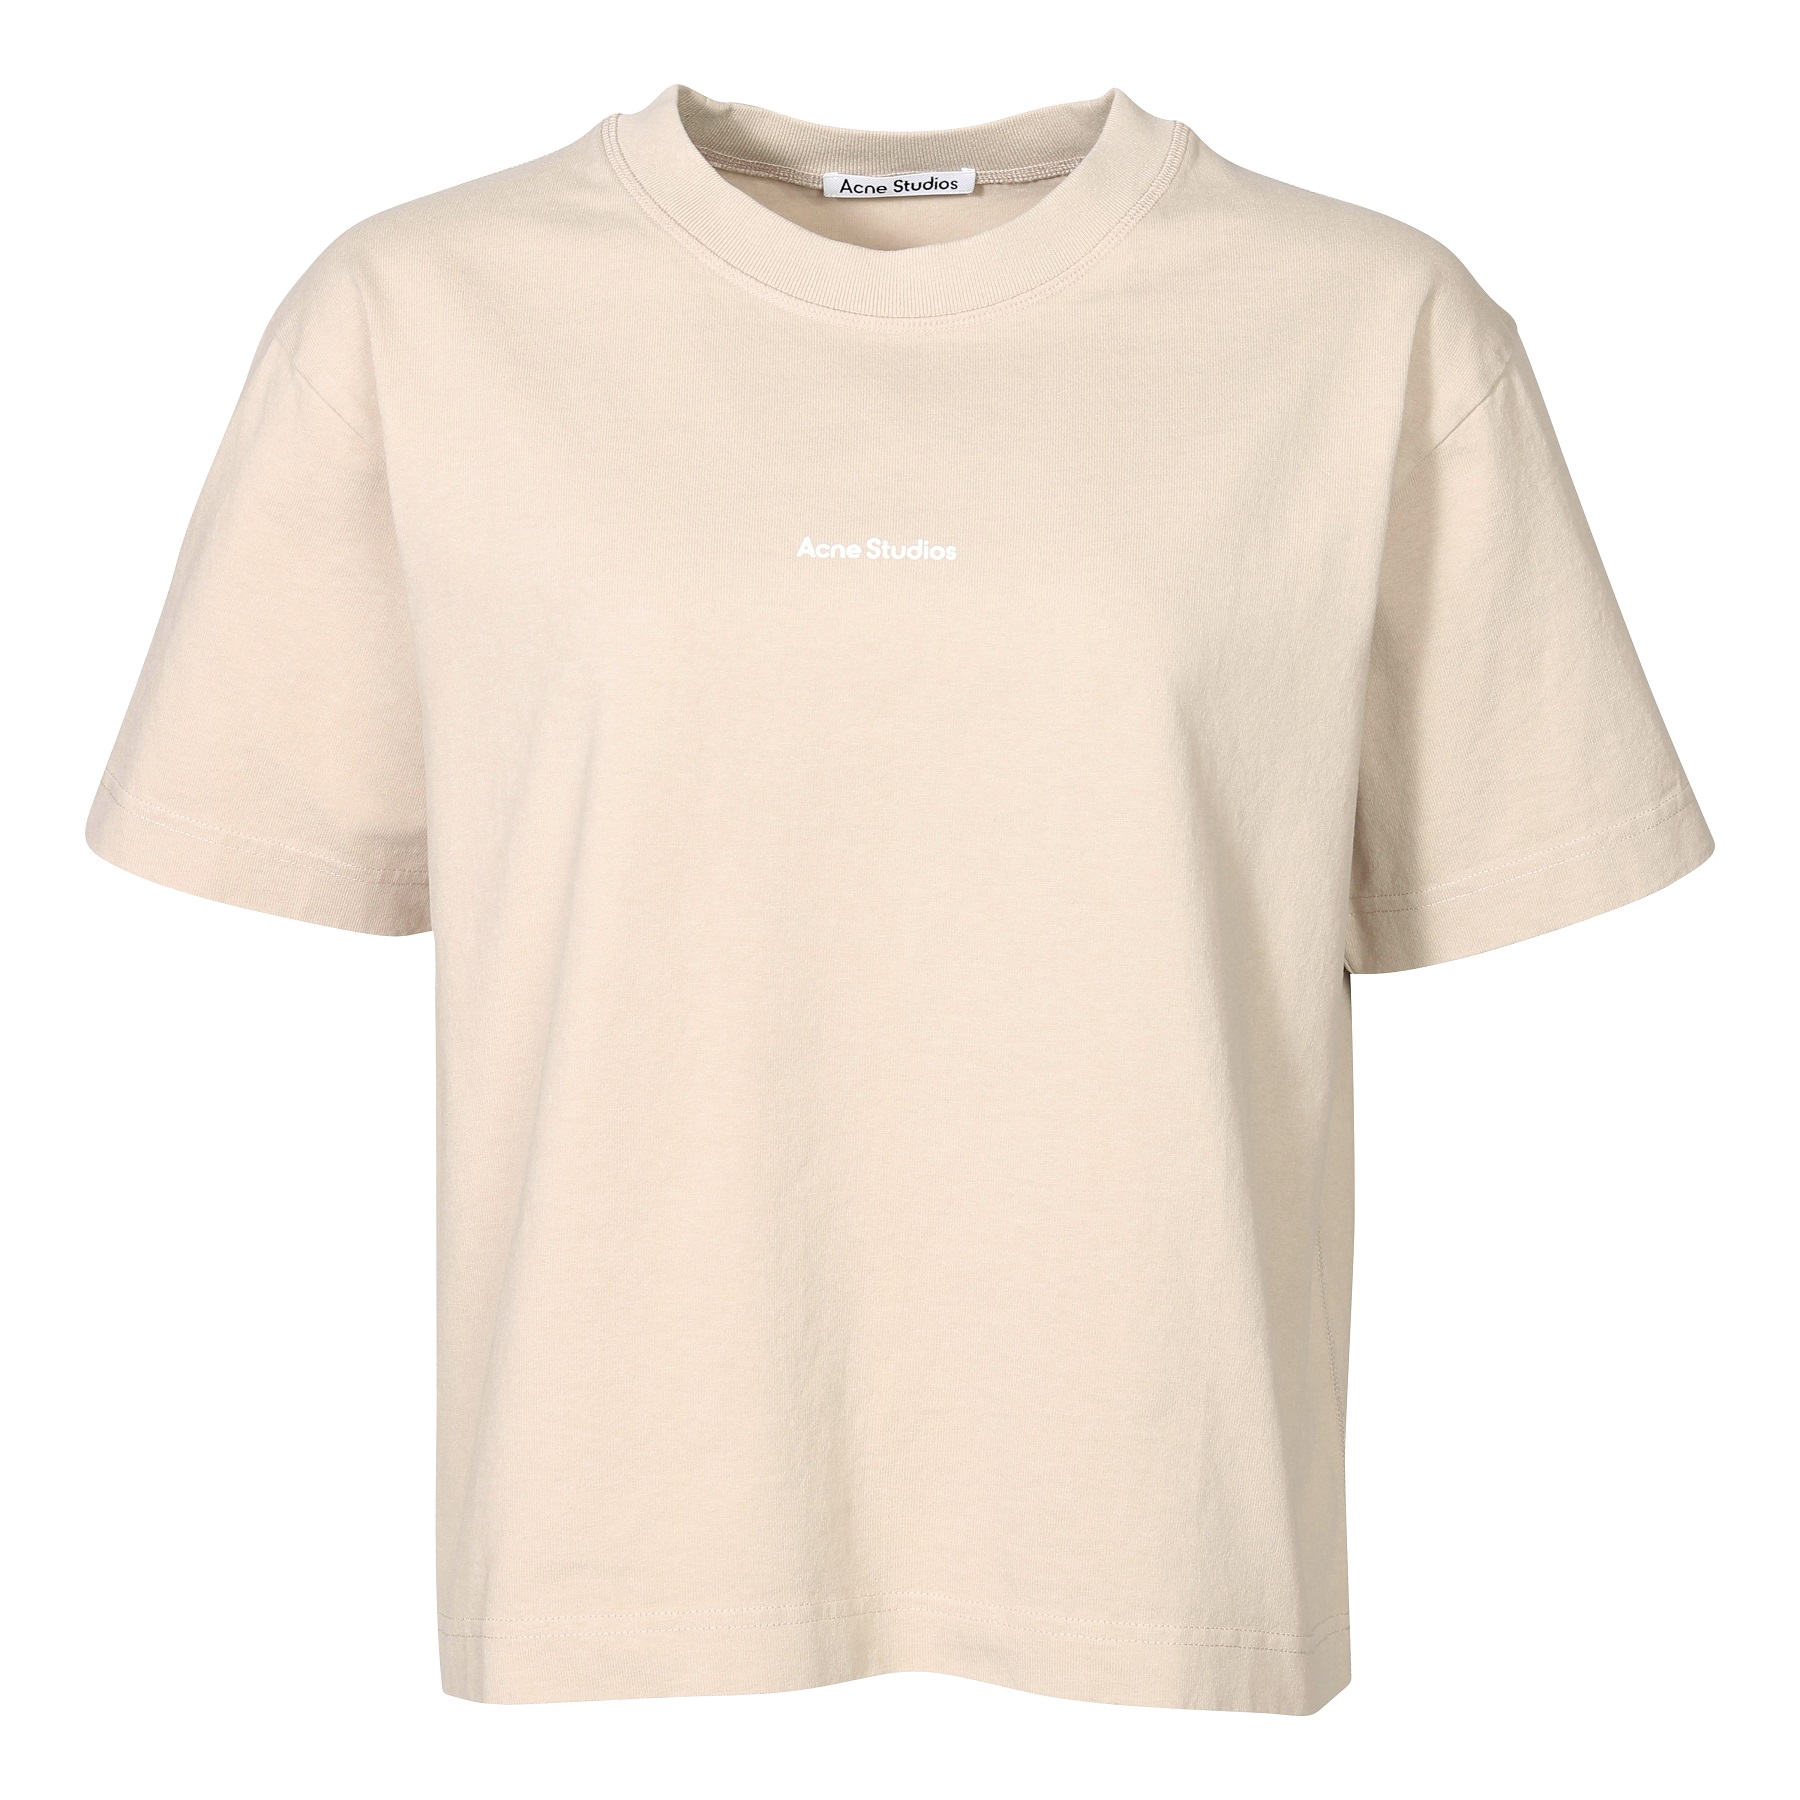 ACNE STUDIOS Stamp T-Shirt in Champagne Beige